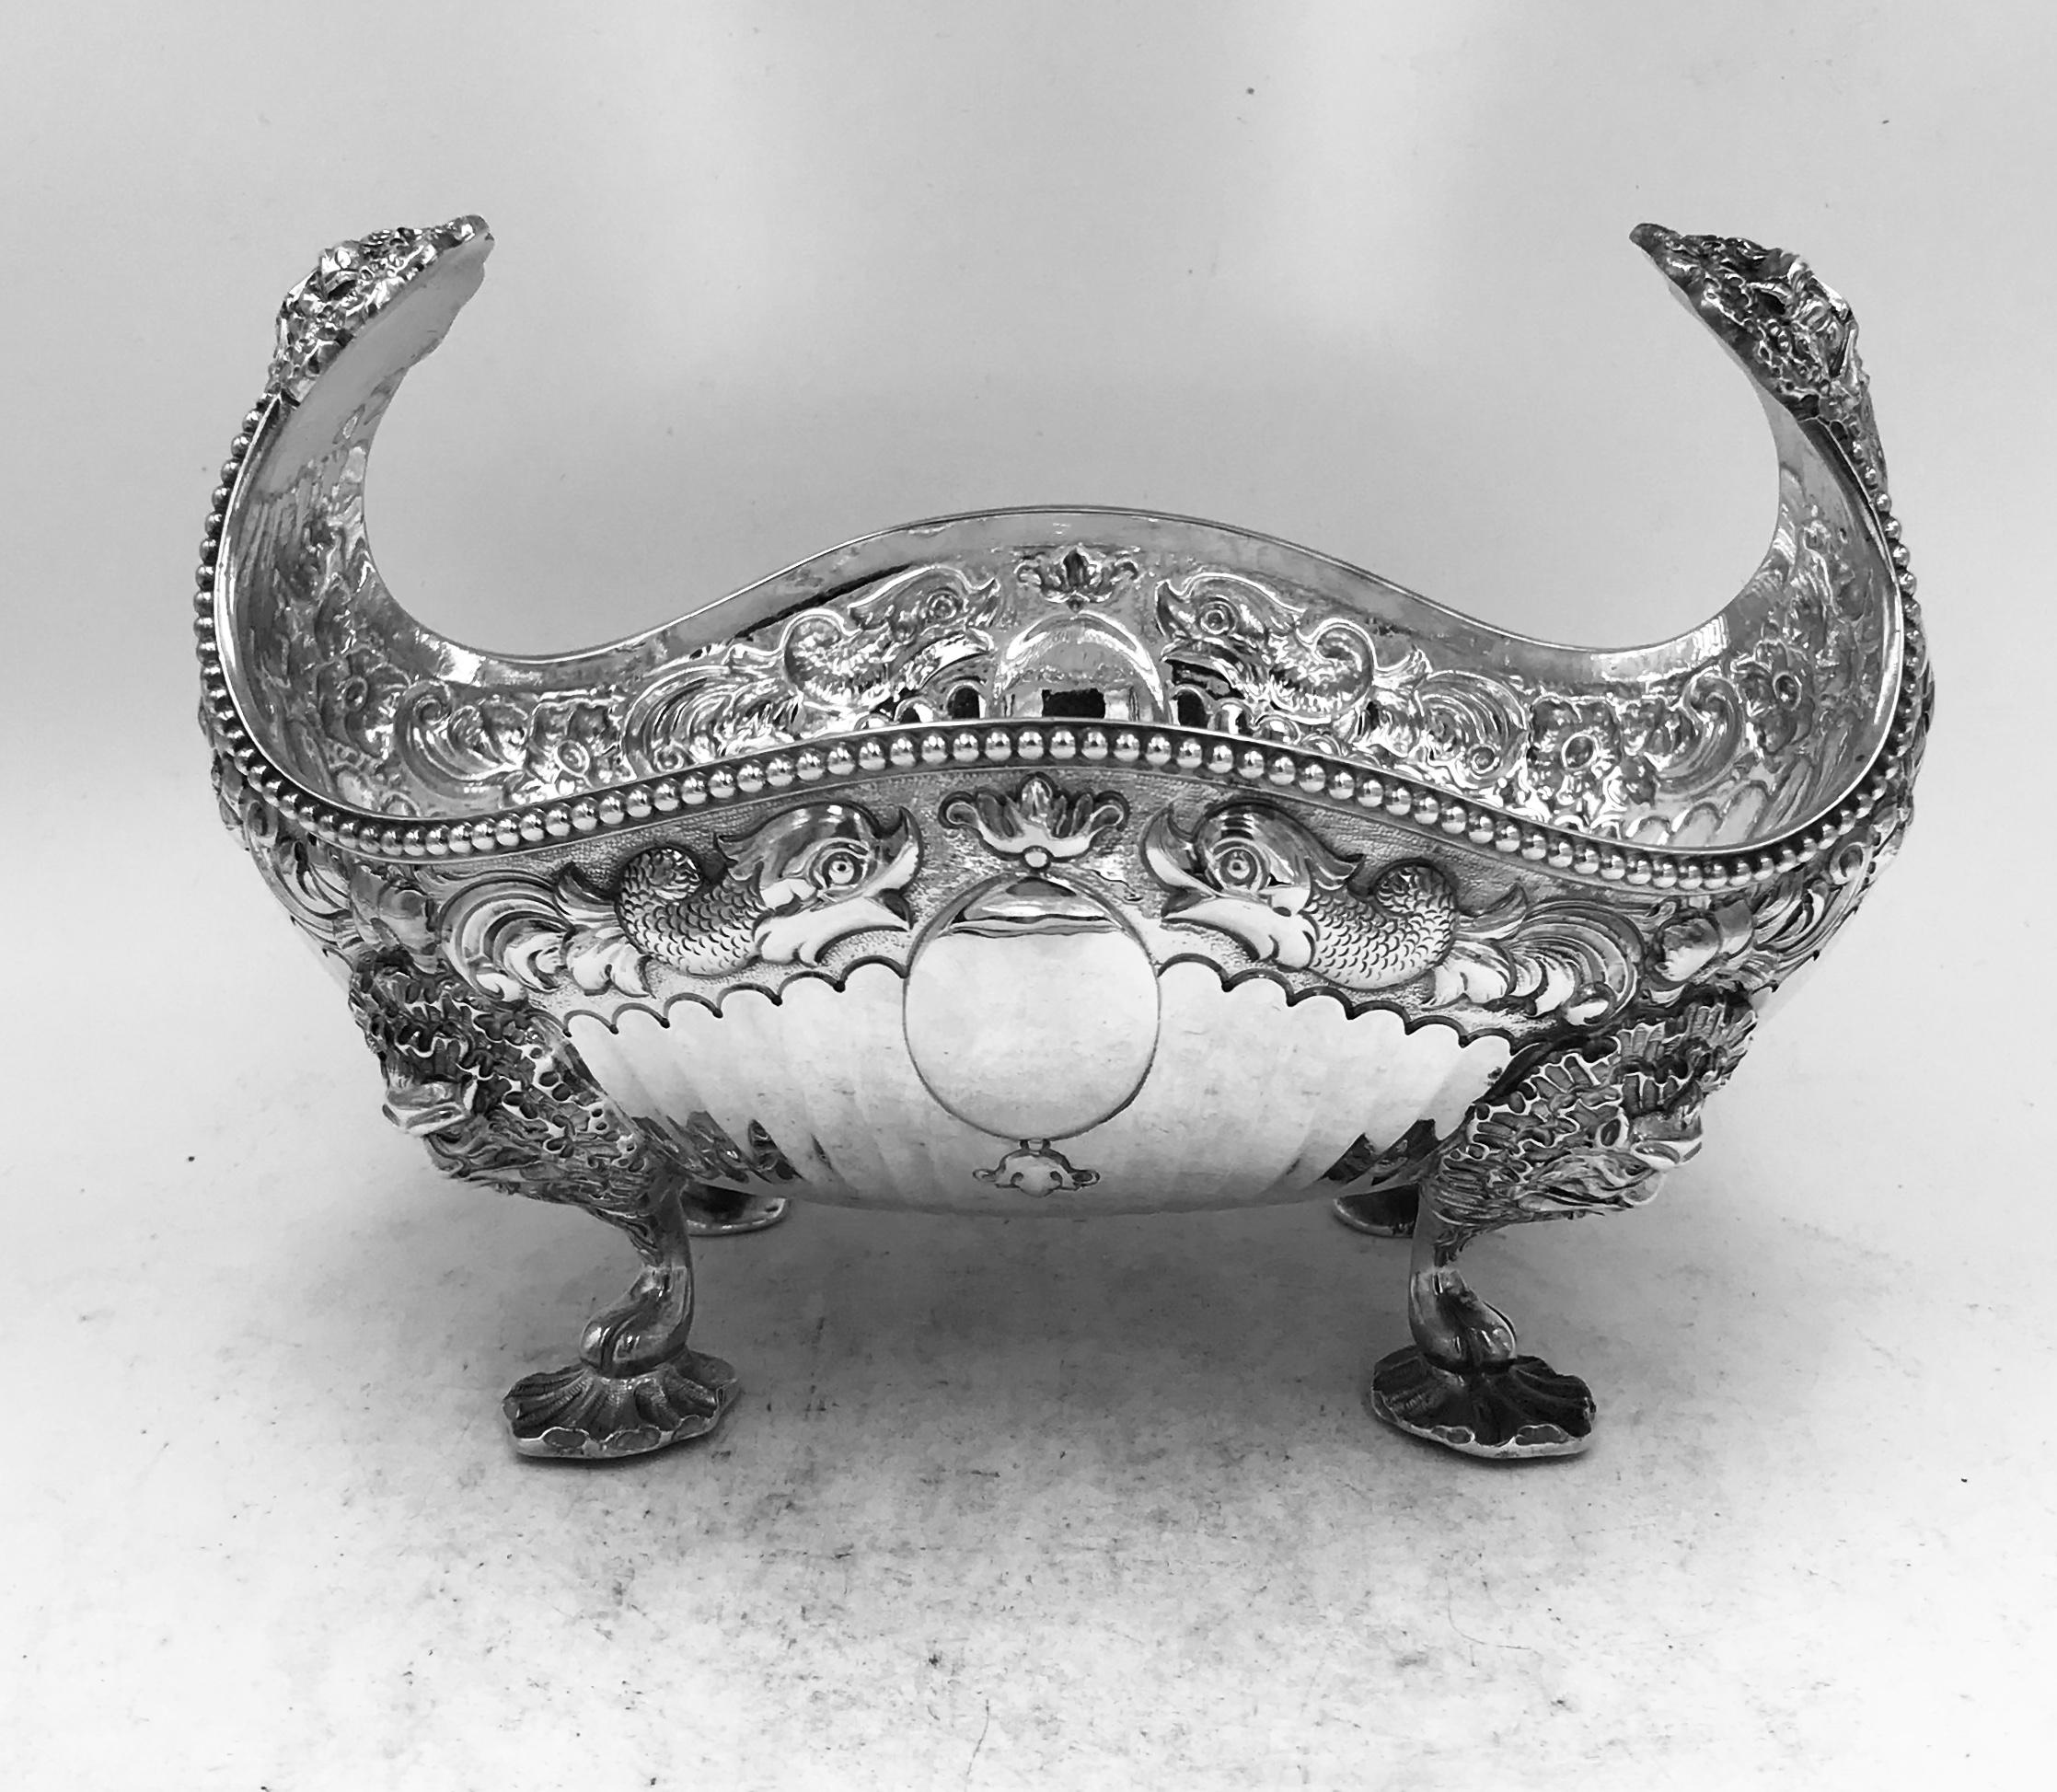 An antique English sterling silver fruit dish of oval form standing on four lion-mask feet. Made by D & J Welby and hallmarked London 1912.